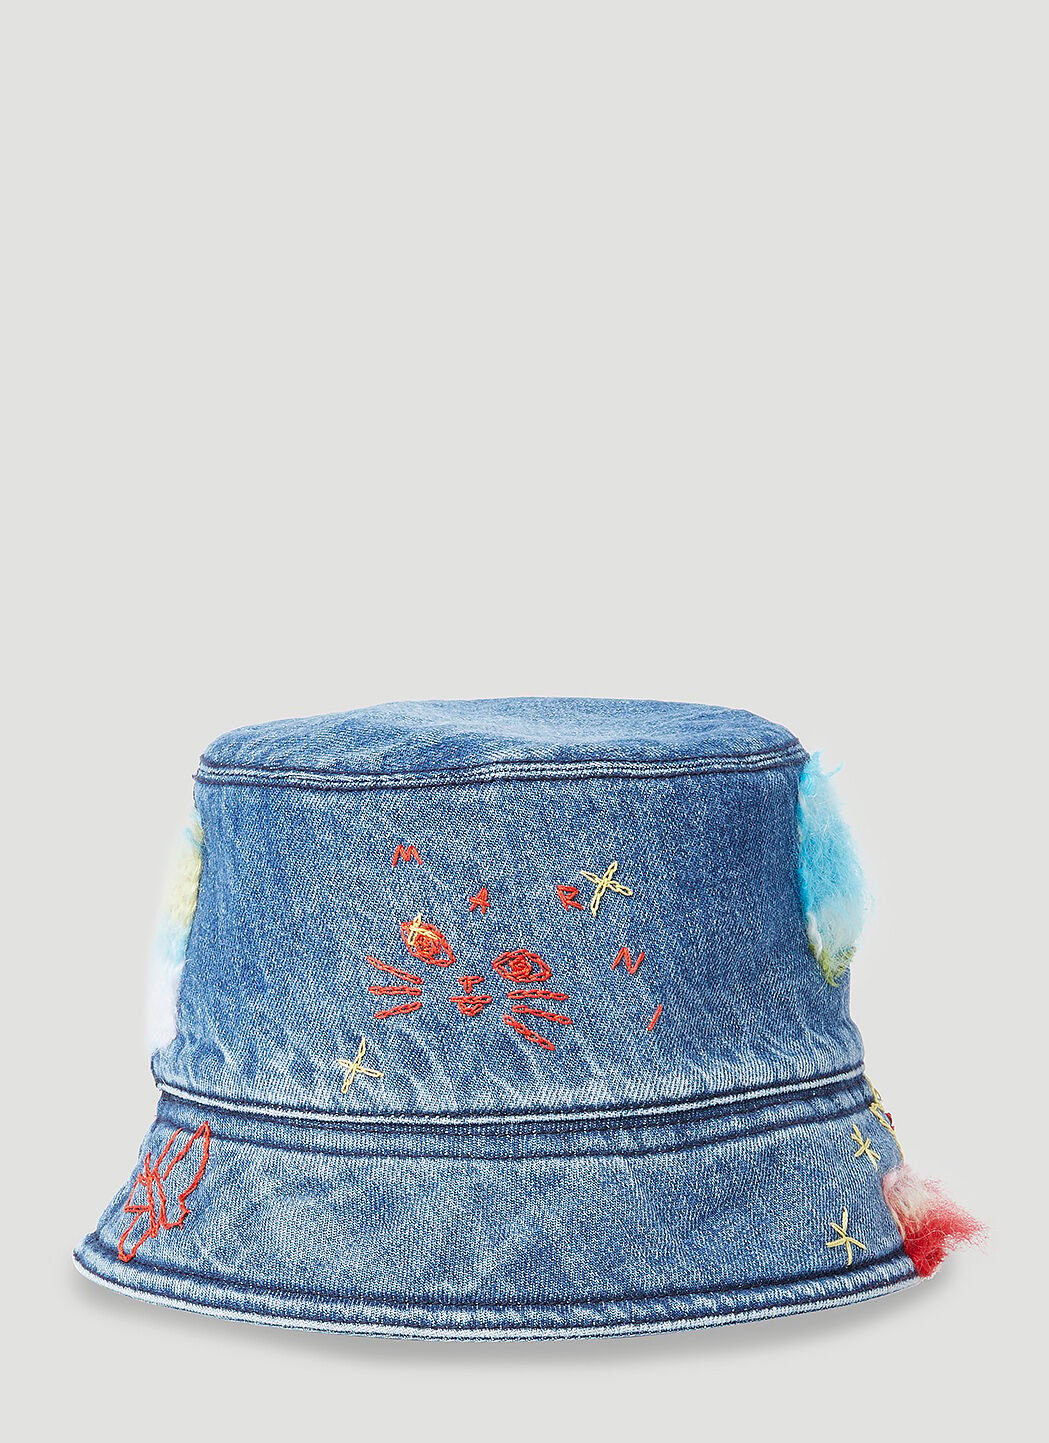 Marni Mohair-Patches Bucket Hat Pink mni0255017